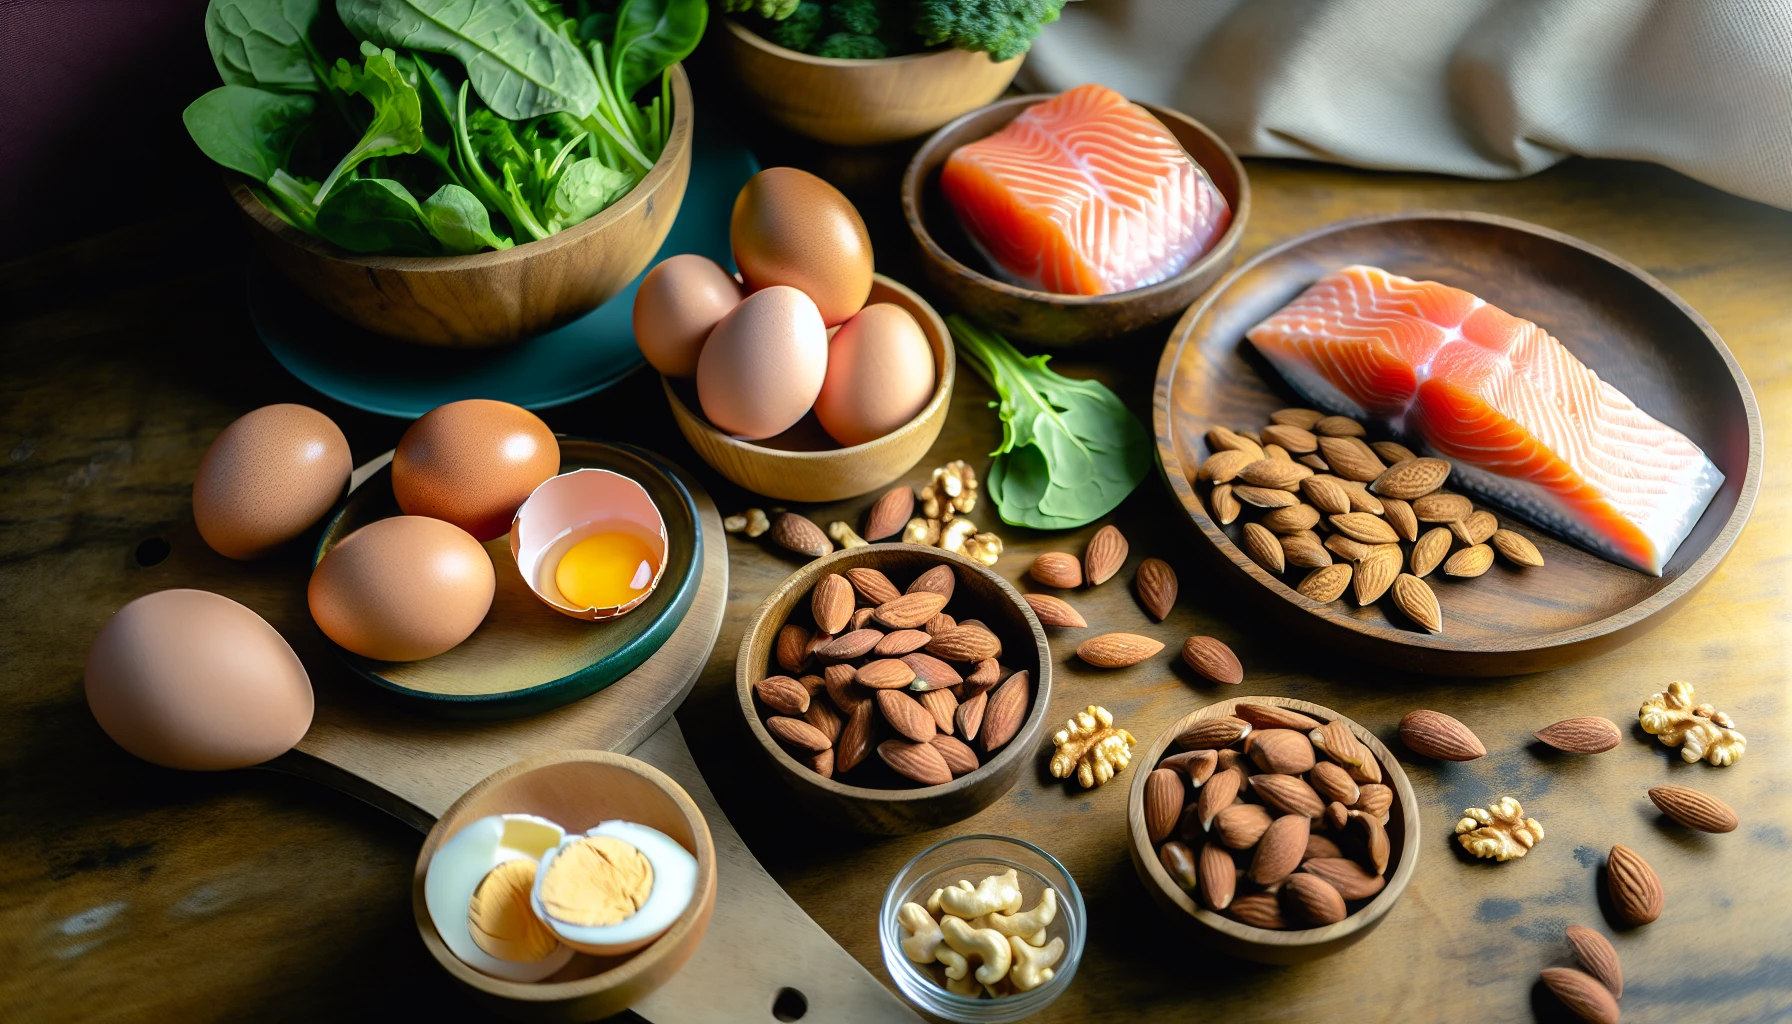 Variety of healthy foods including eggs, fish, and nuts